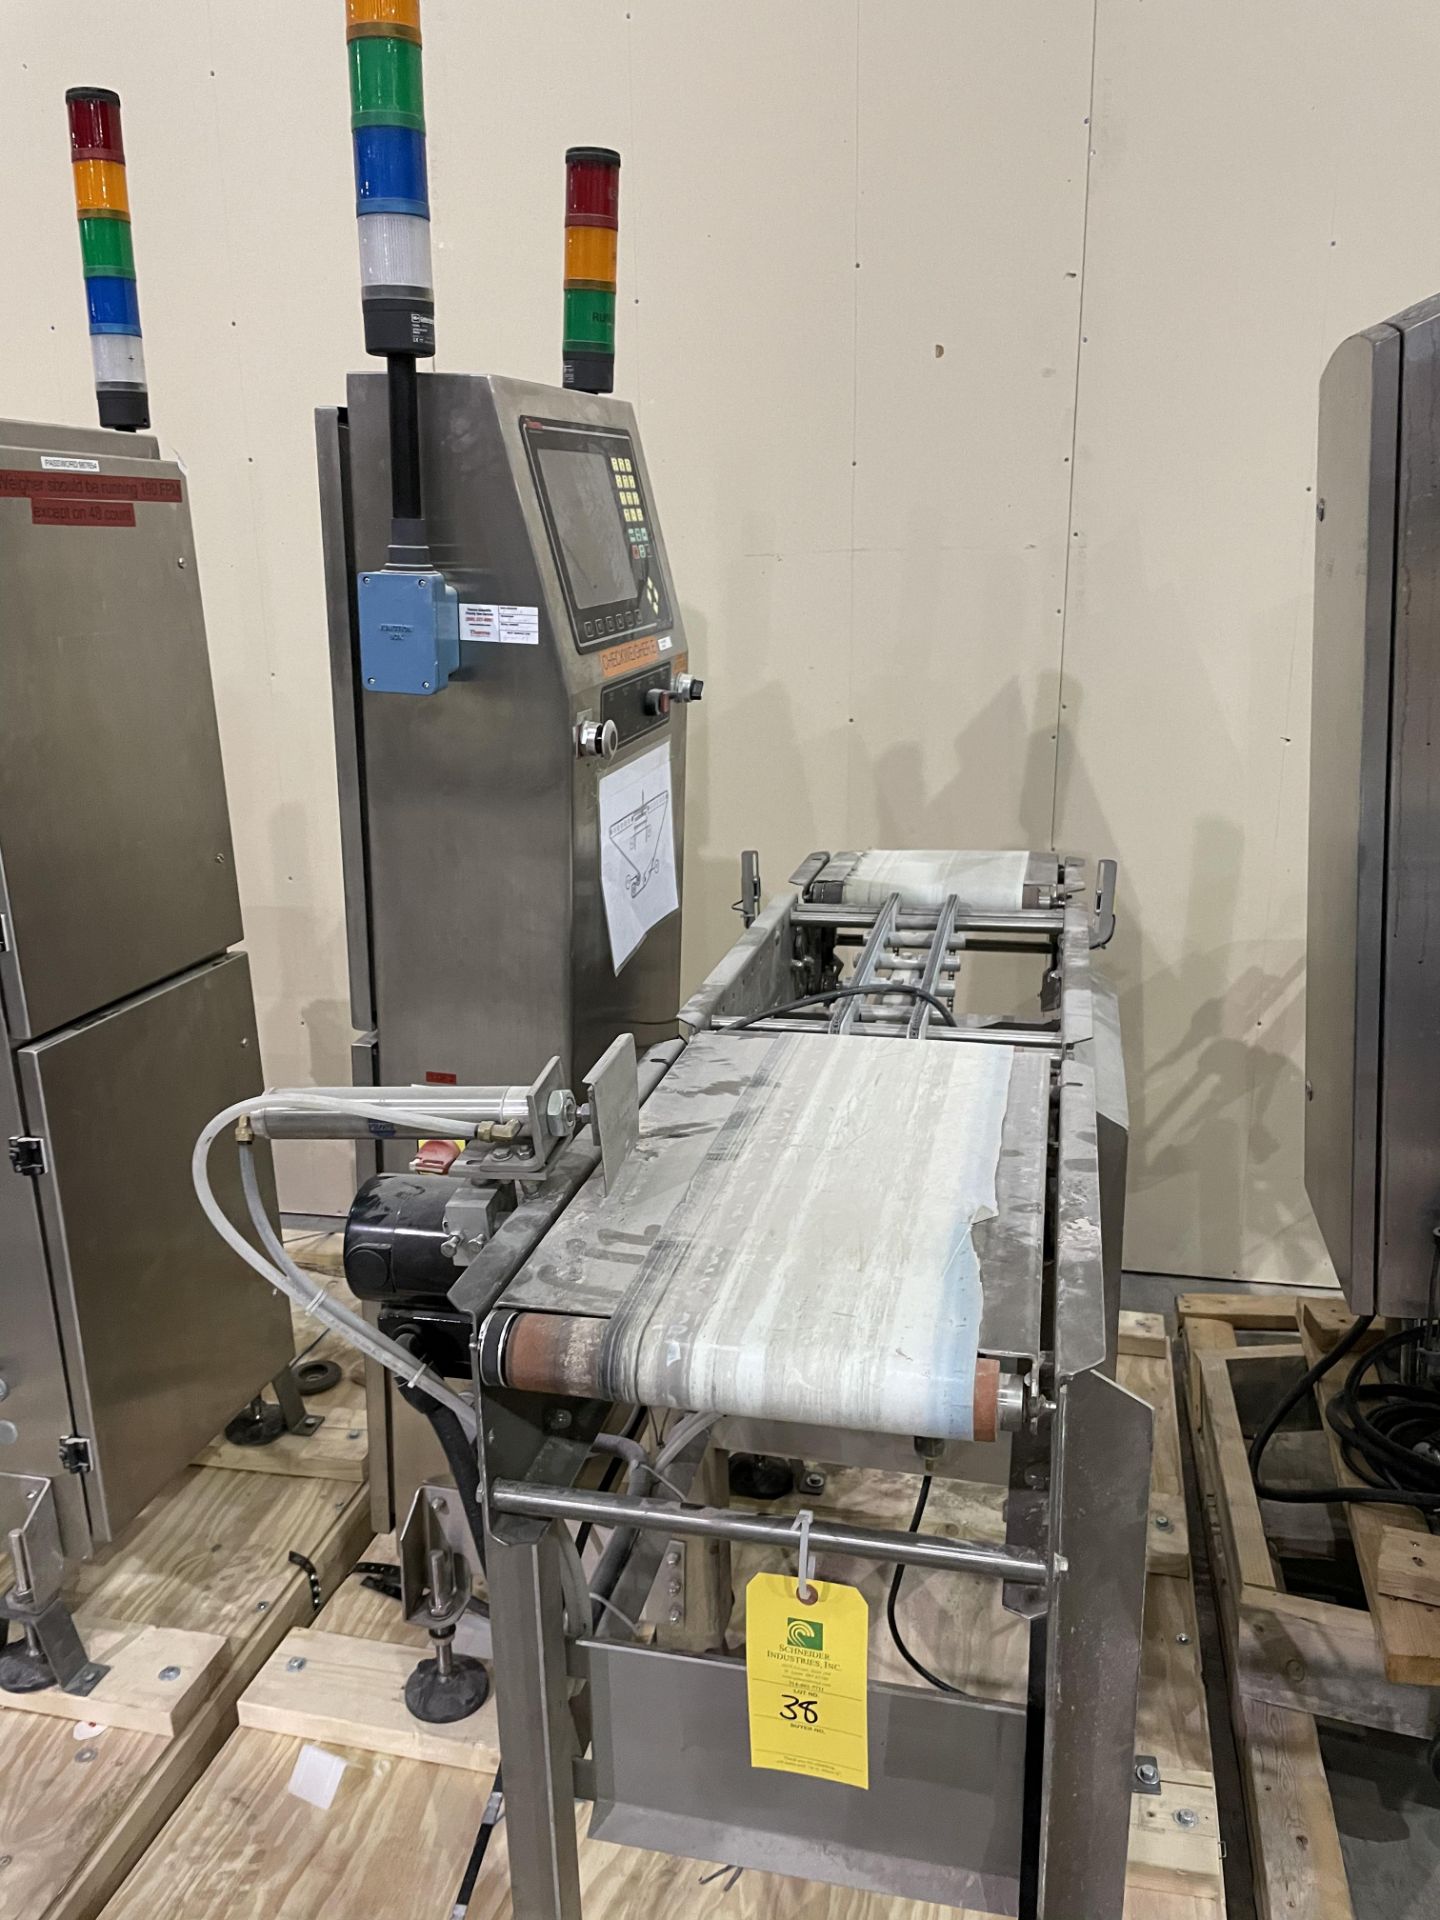 Thermo Ramsey Checkweigher Model AC9000(P)-8120 S/N 0802735 Loading/Rigging Fee $100 - Image 4 of 4